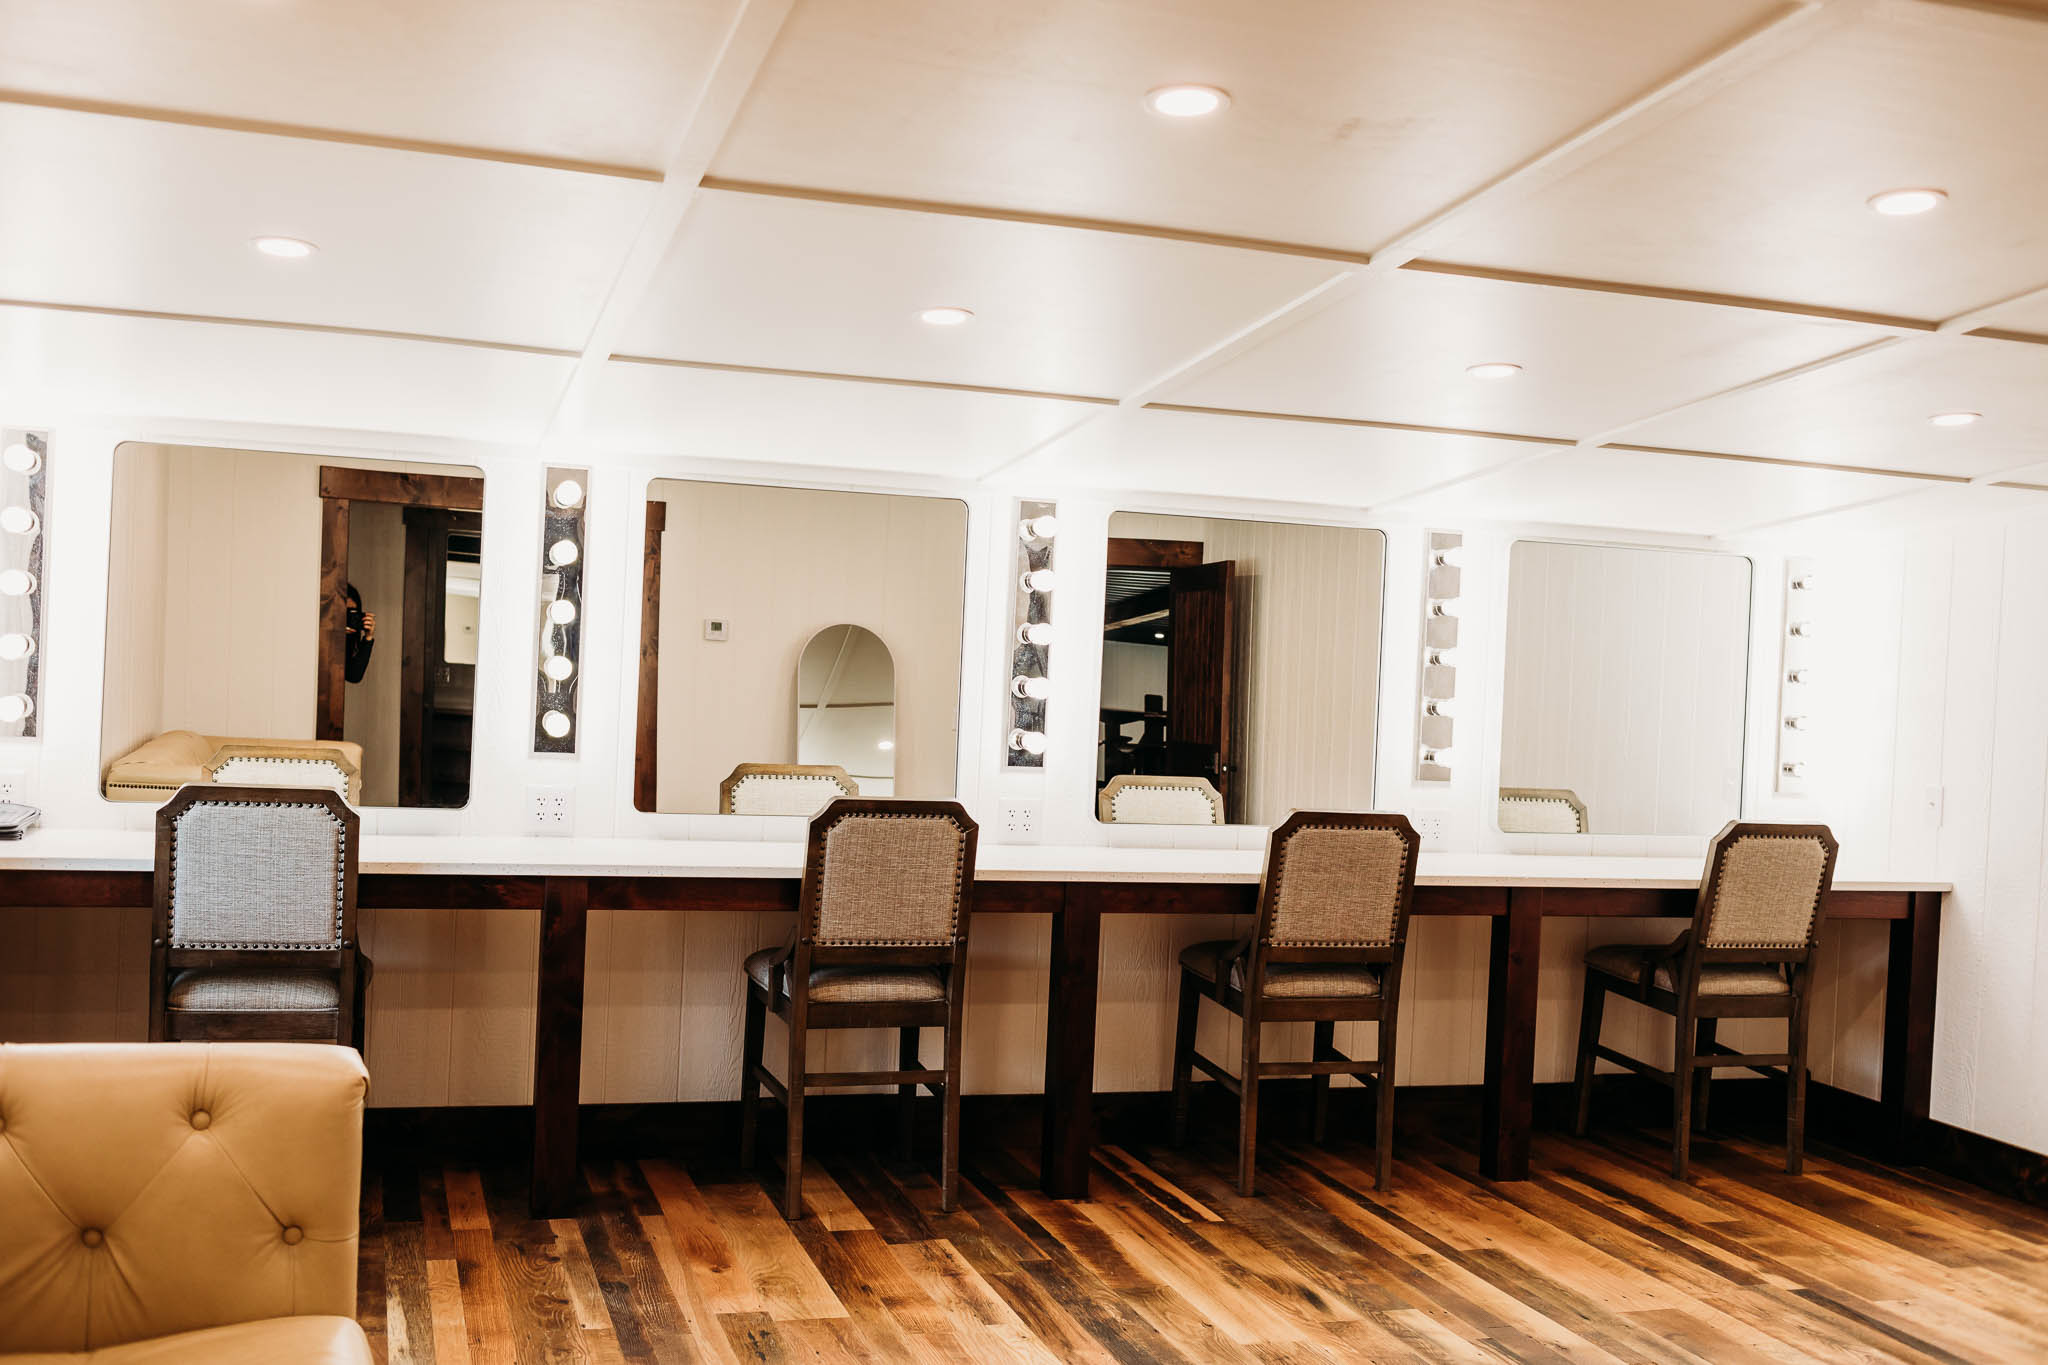 Bride's private getting ready suite at The VeNue Event Space features 4 large mirrors with vertical make up lights in between. There is a white granite make up counter that seats four.